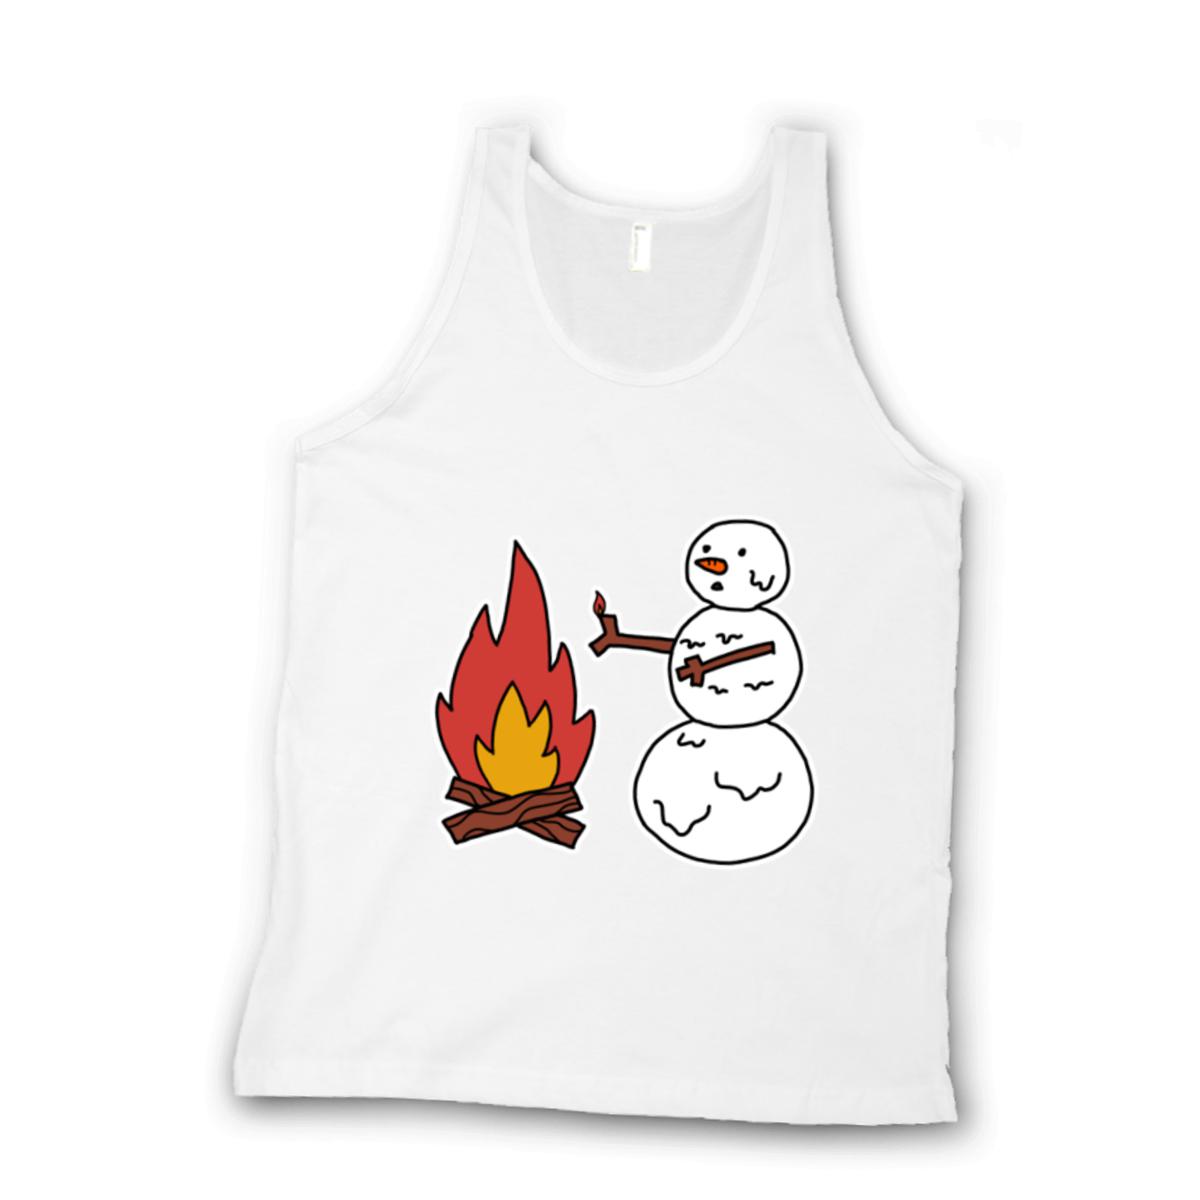 Snowman Keeping Warm Unisex Tank Top Extra Small white